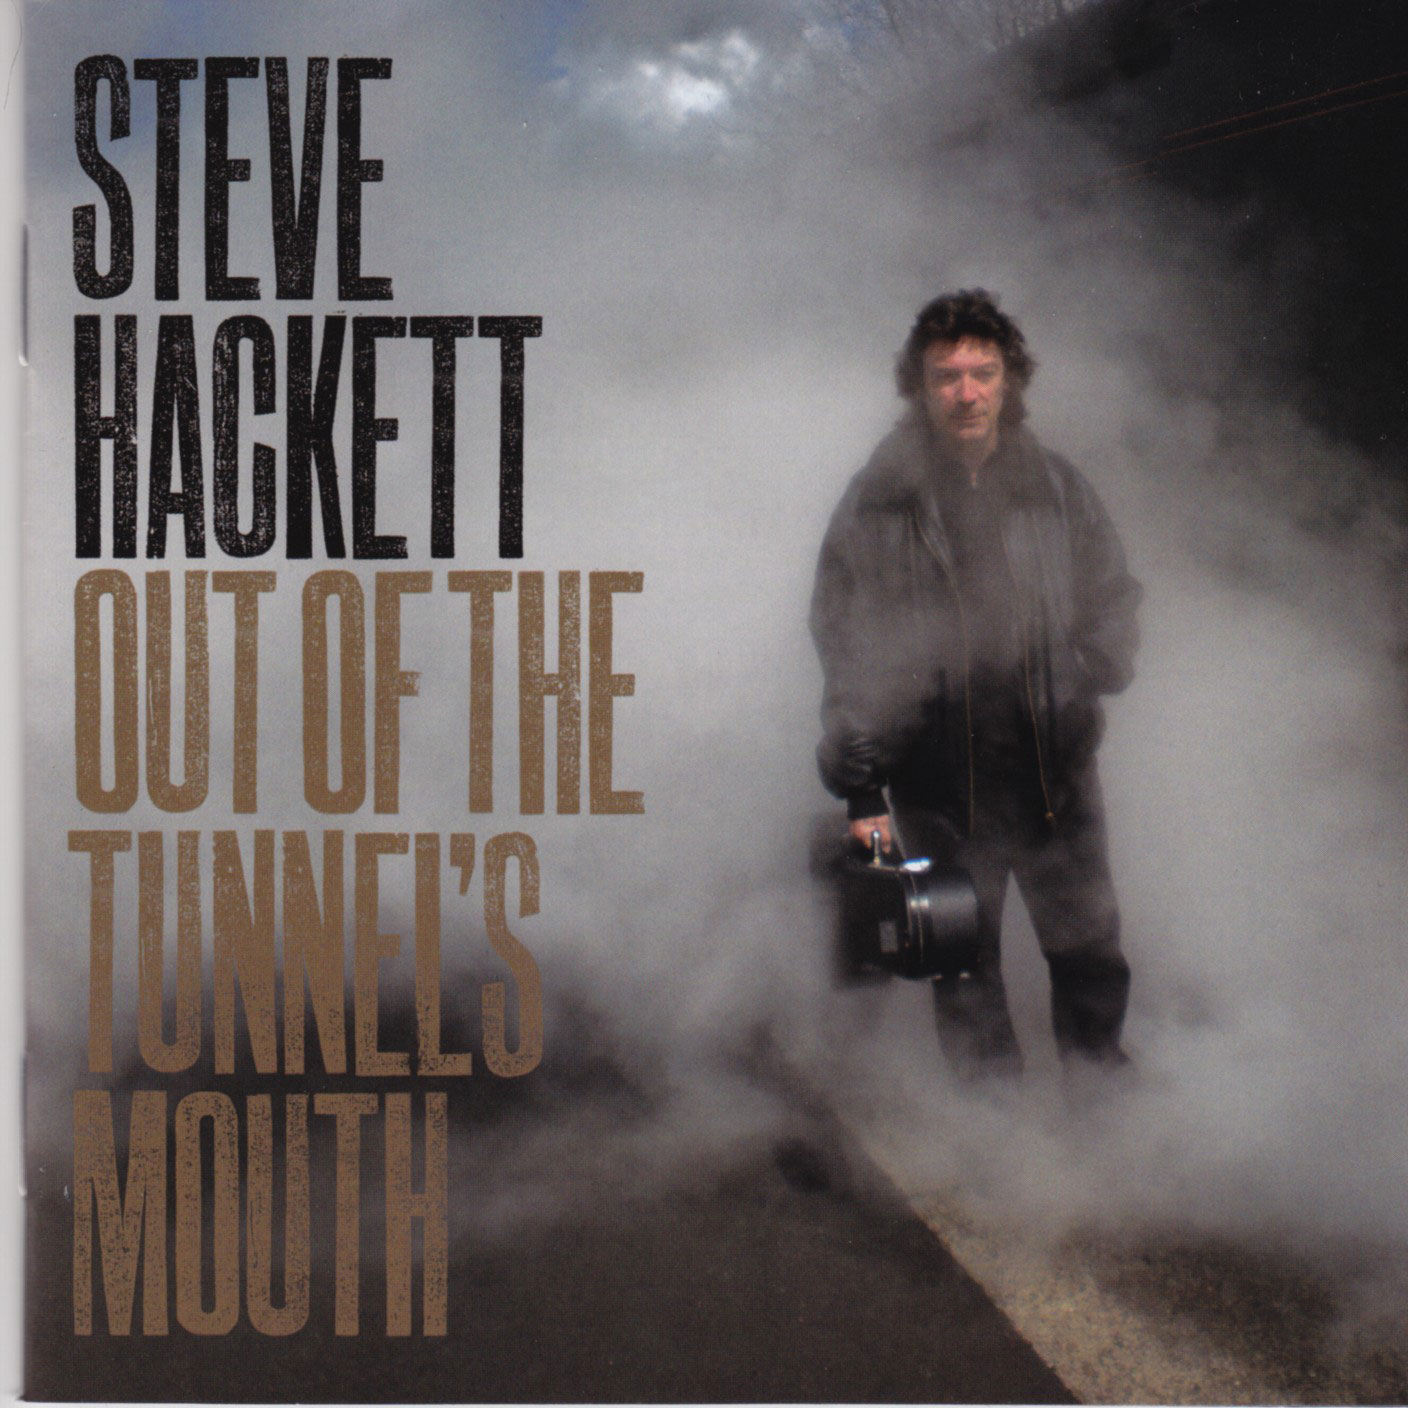 Steve Hackett: Out of the Tunnel's Mouth